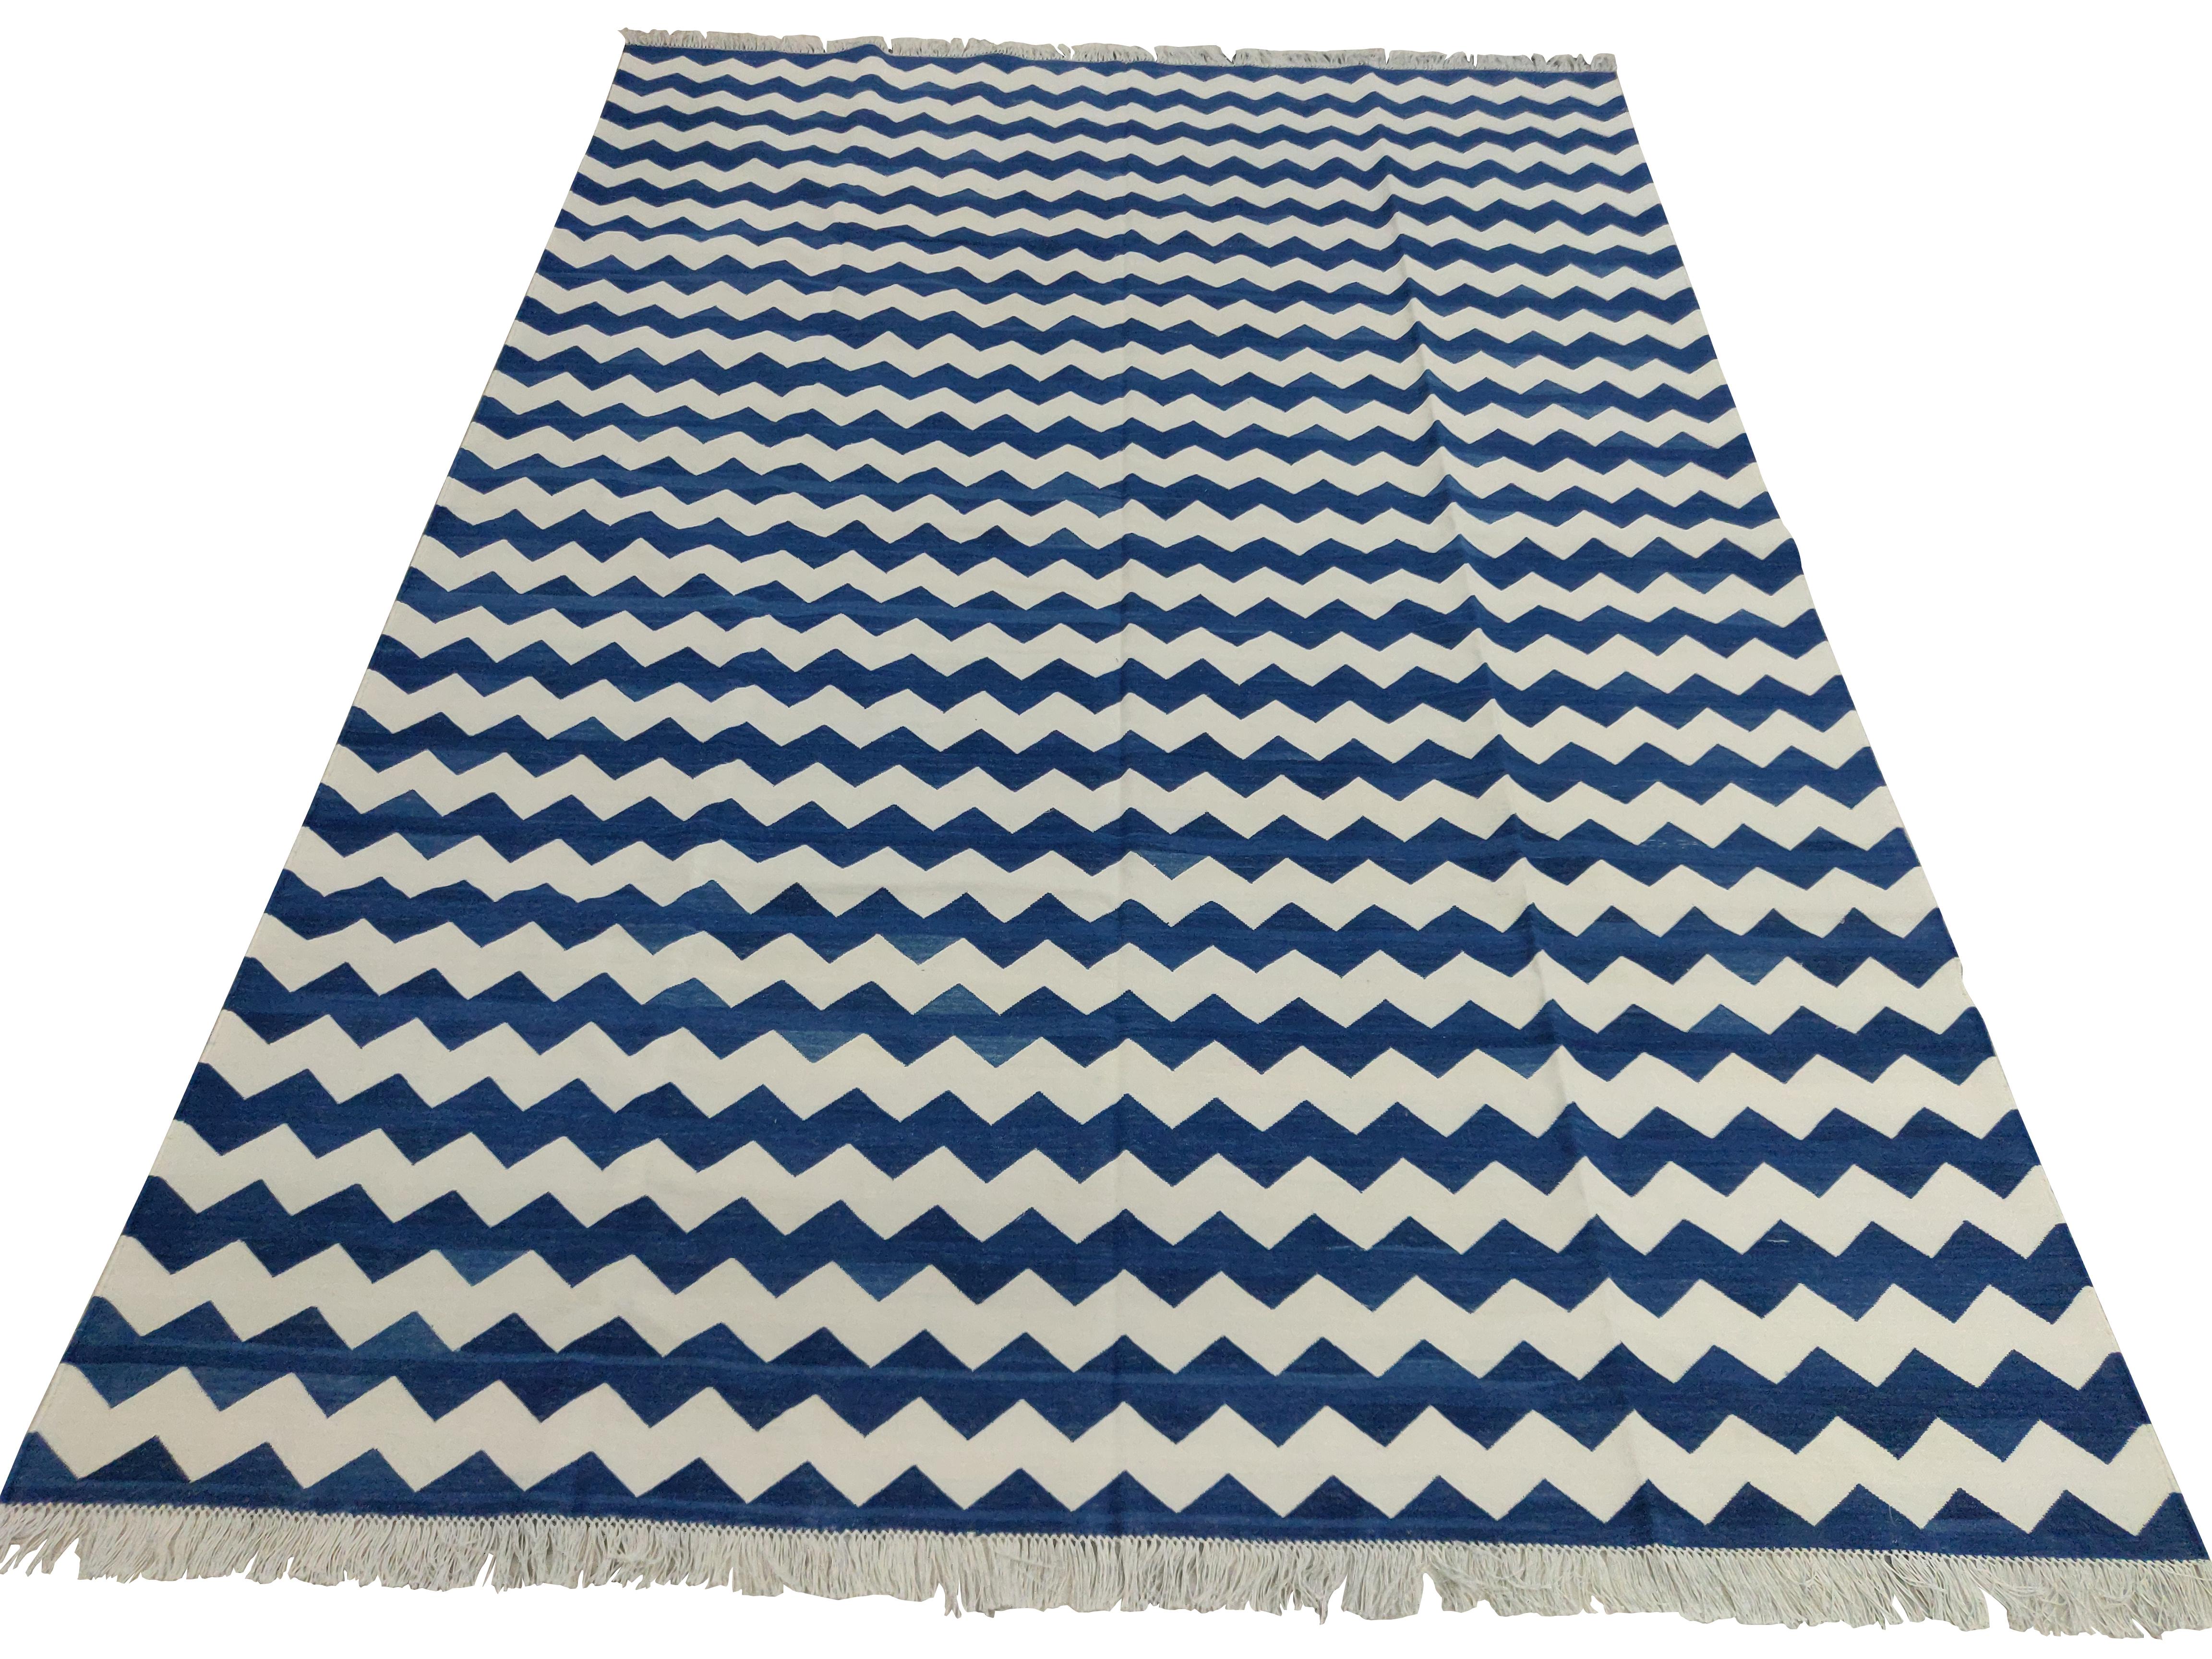 Mid-Century Modern Handmade Cotton Area Flat Weave Rug, 6x9 Blue And White Zig Zag Striped Dhurrie For Sale